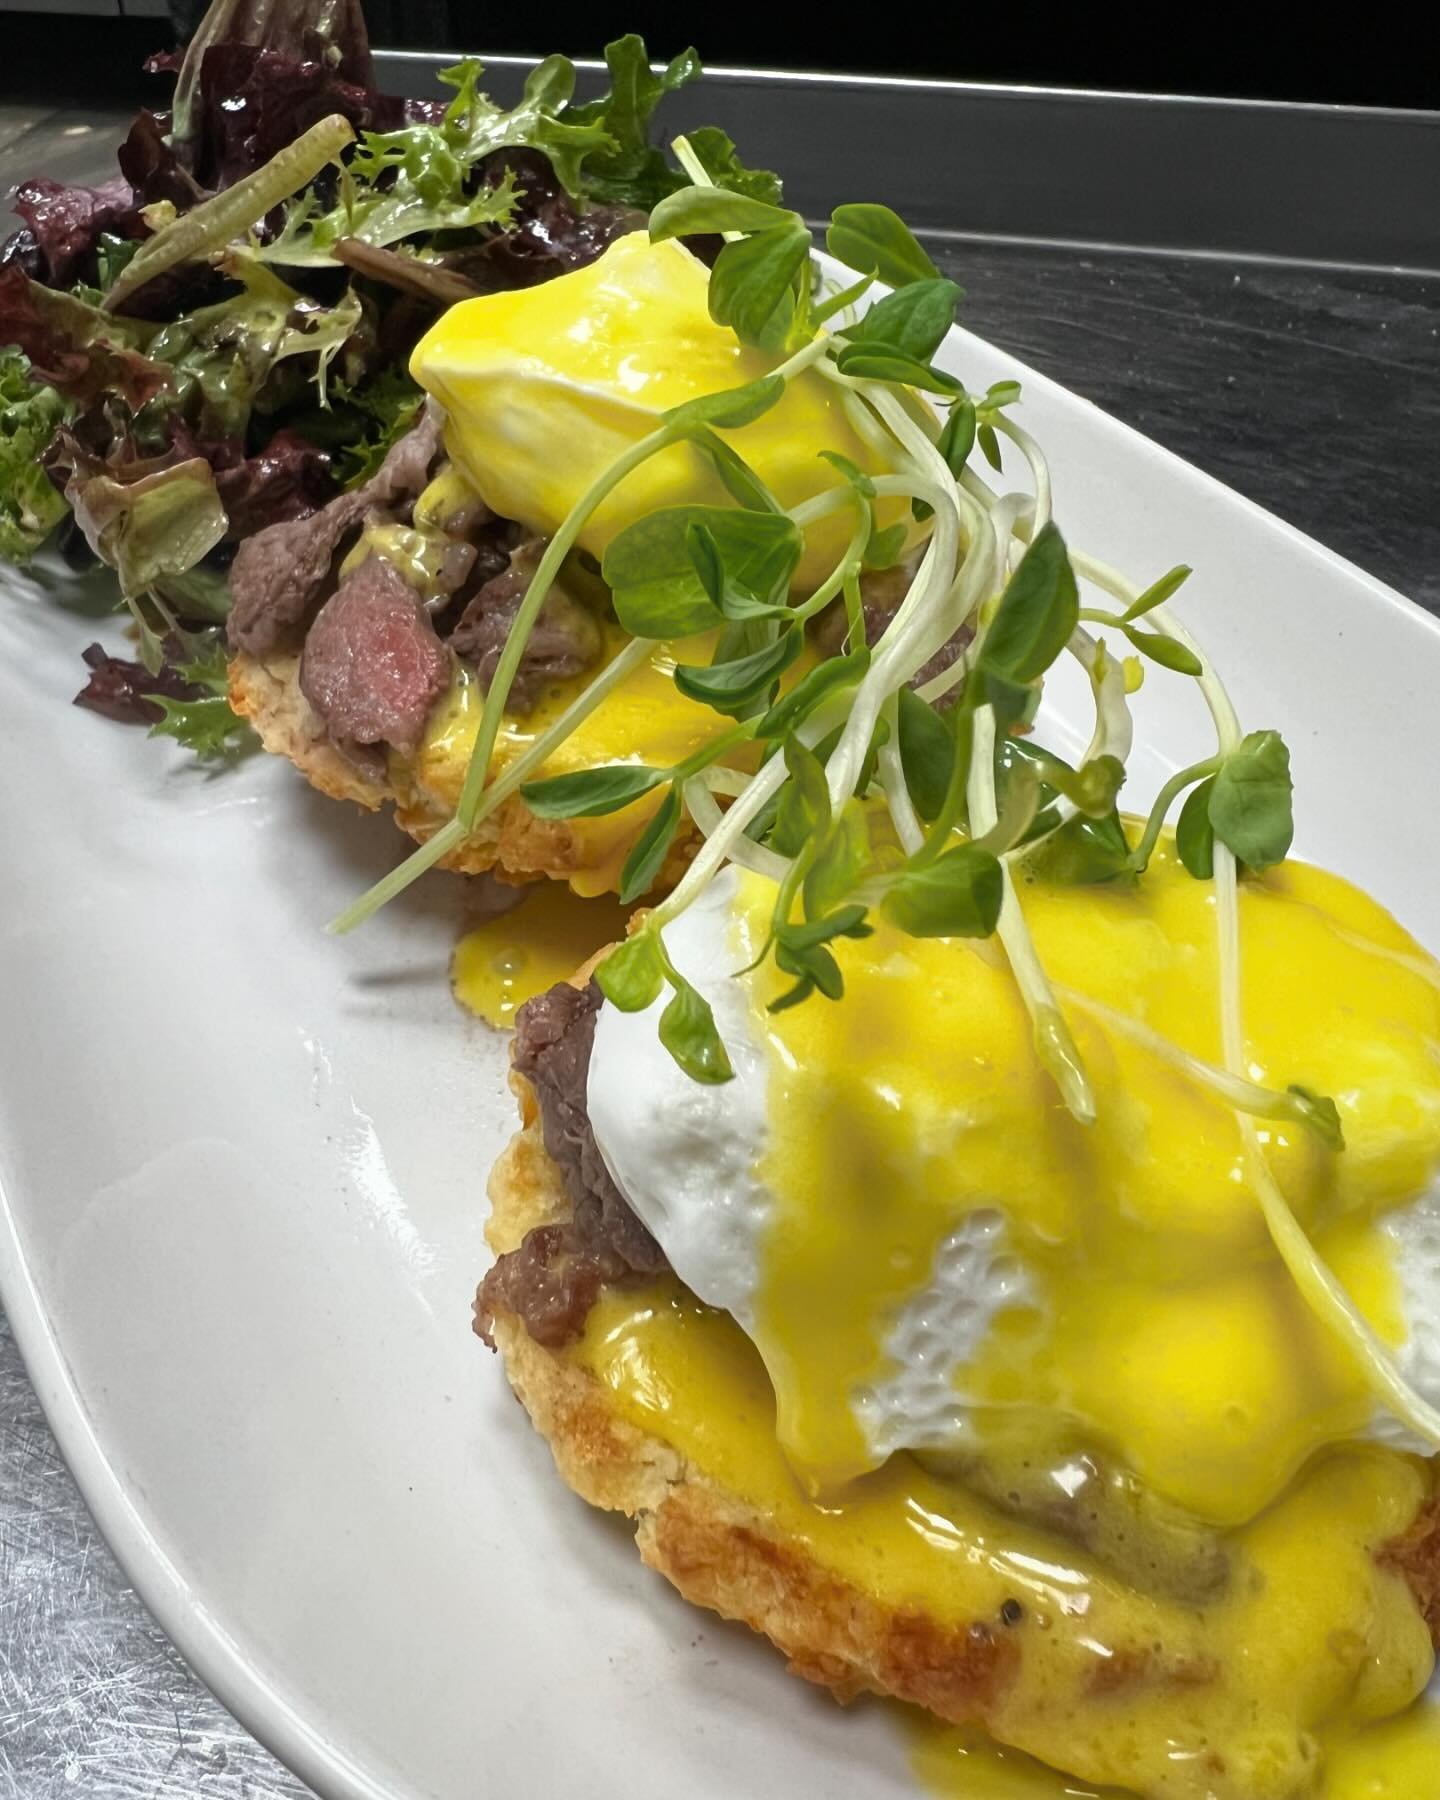 Heading to Maplefest today?  Stop in here for brunch before you go and fuel up!  The steak and eggs bene would make a great choice! 

Happy sunny Saturday 😎